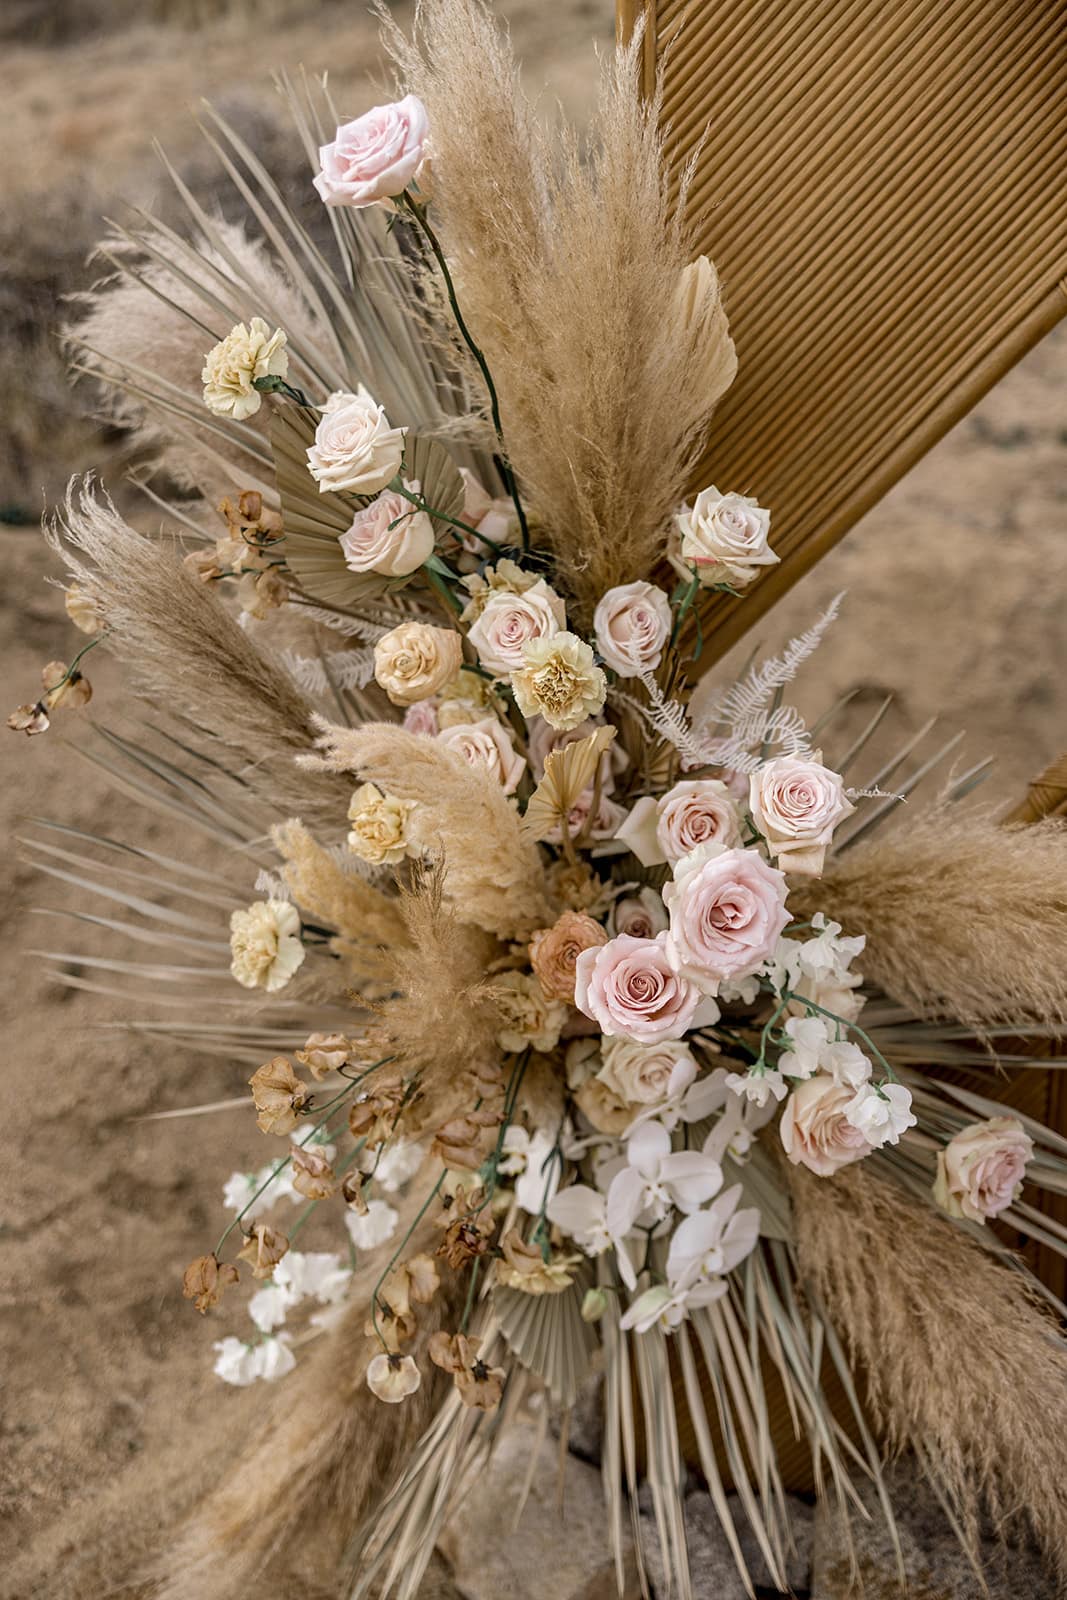 Pampas grass and pink and white roses serve as floral arrangement for wedding ceremony decor